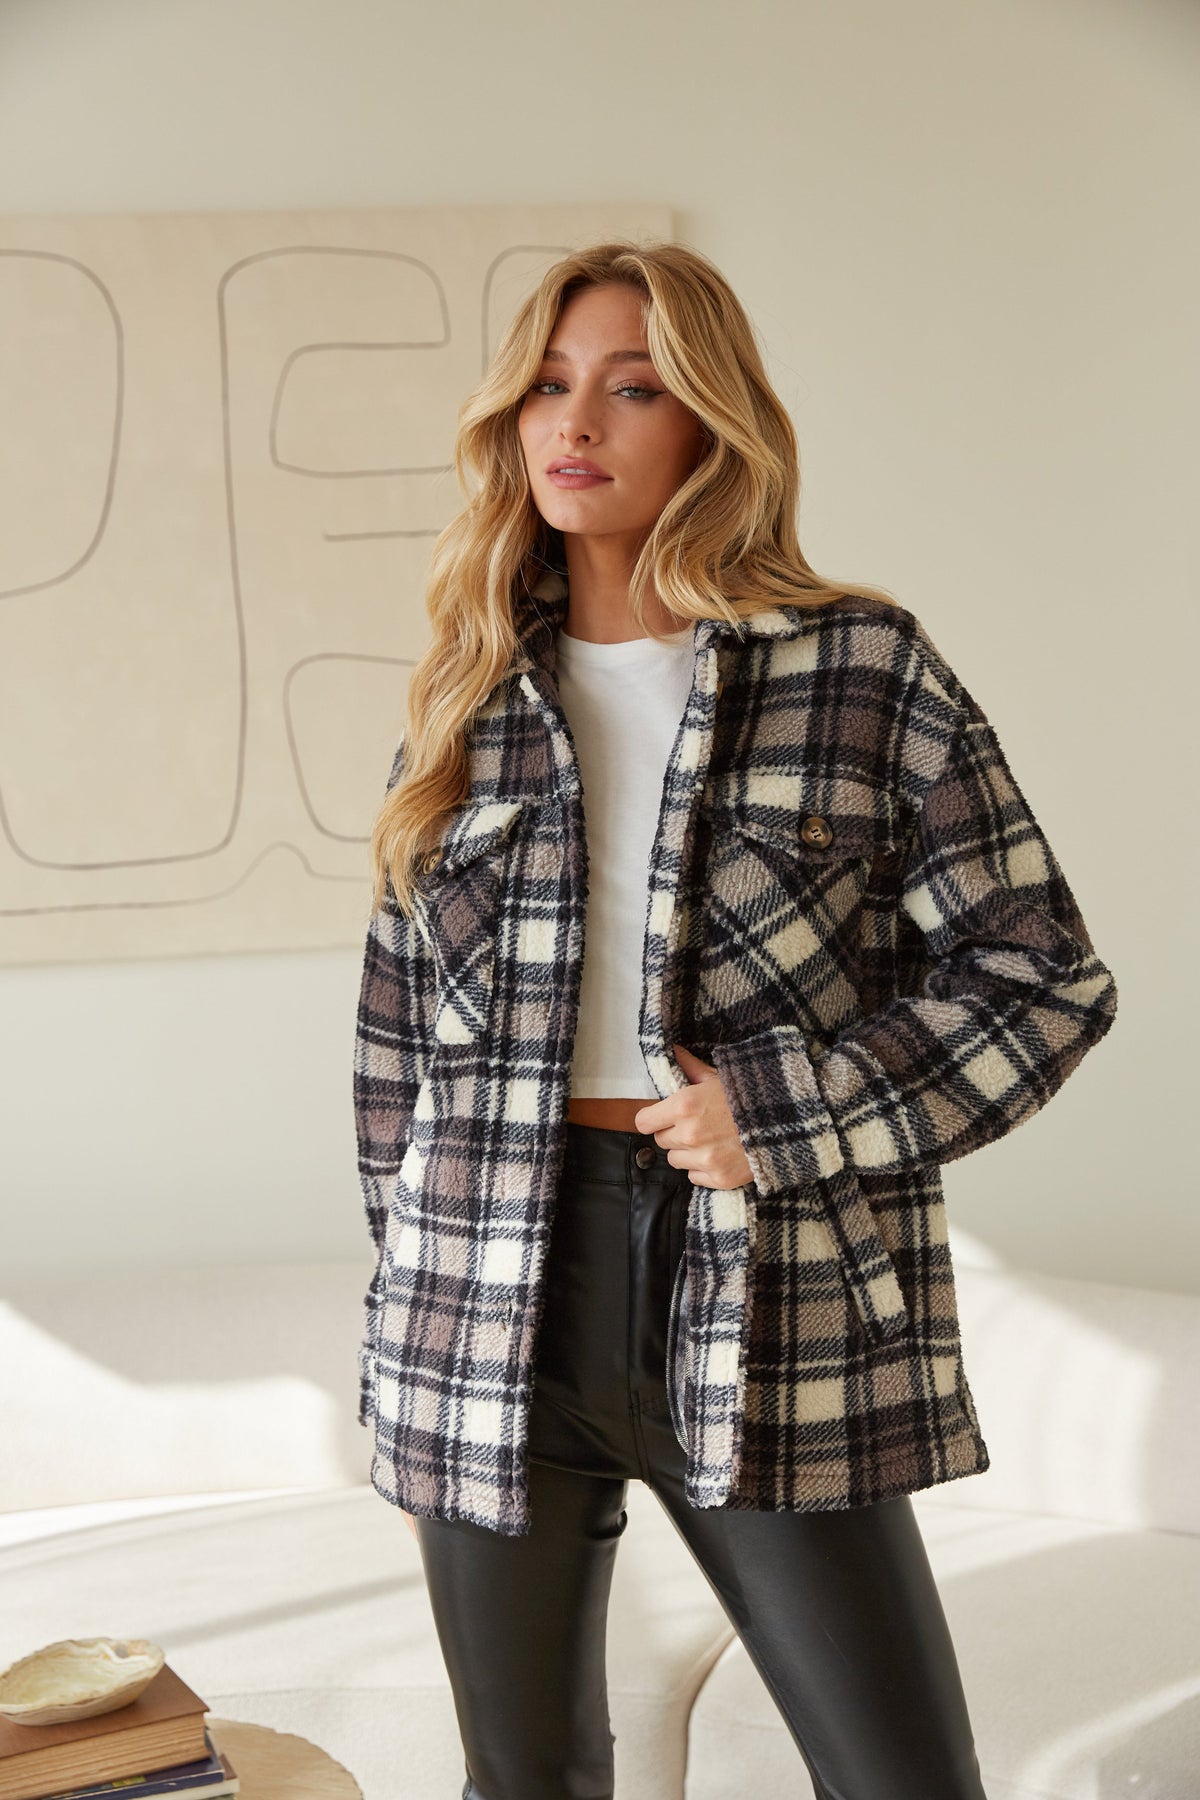 black and brown plaid sherpa shacket - fuzzy plaid jacket - black and ivory plaid outerwear - thanksgiving outfit inspo - fall fashion - cozy outfits for cold weather